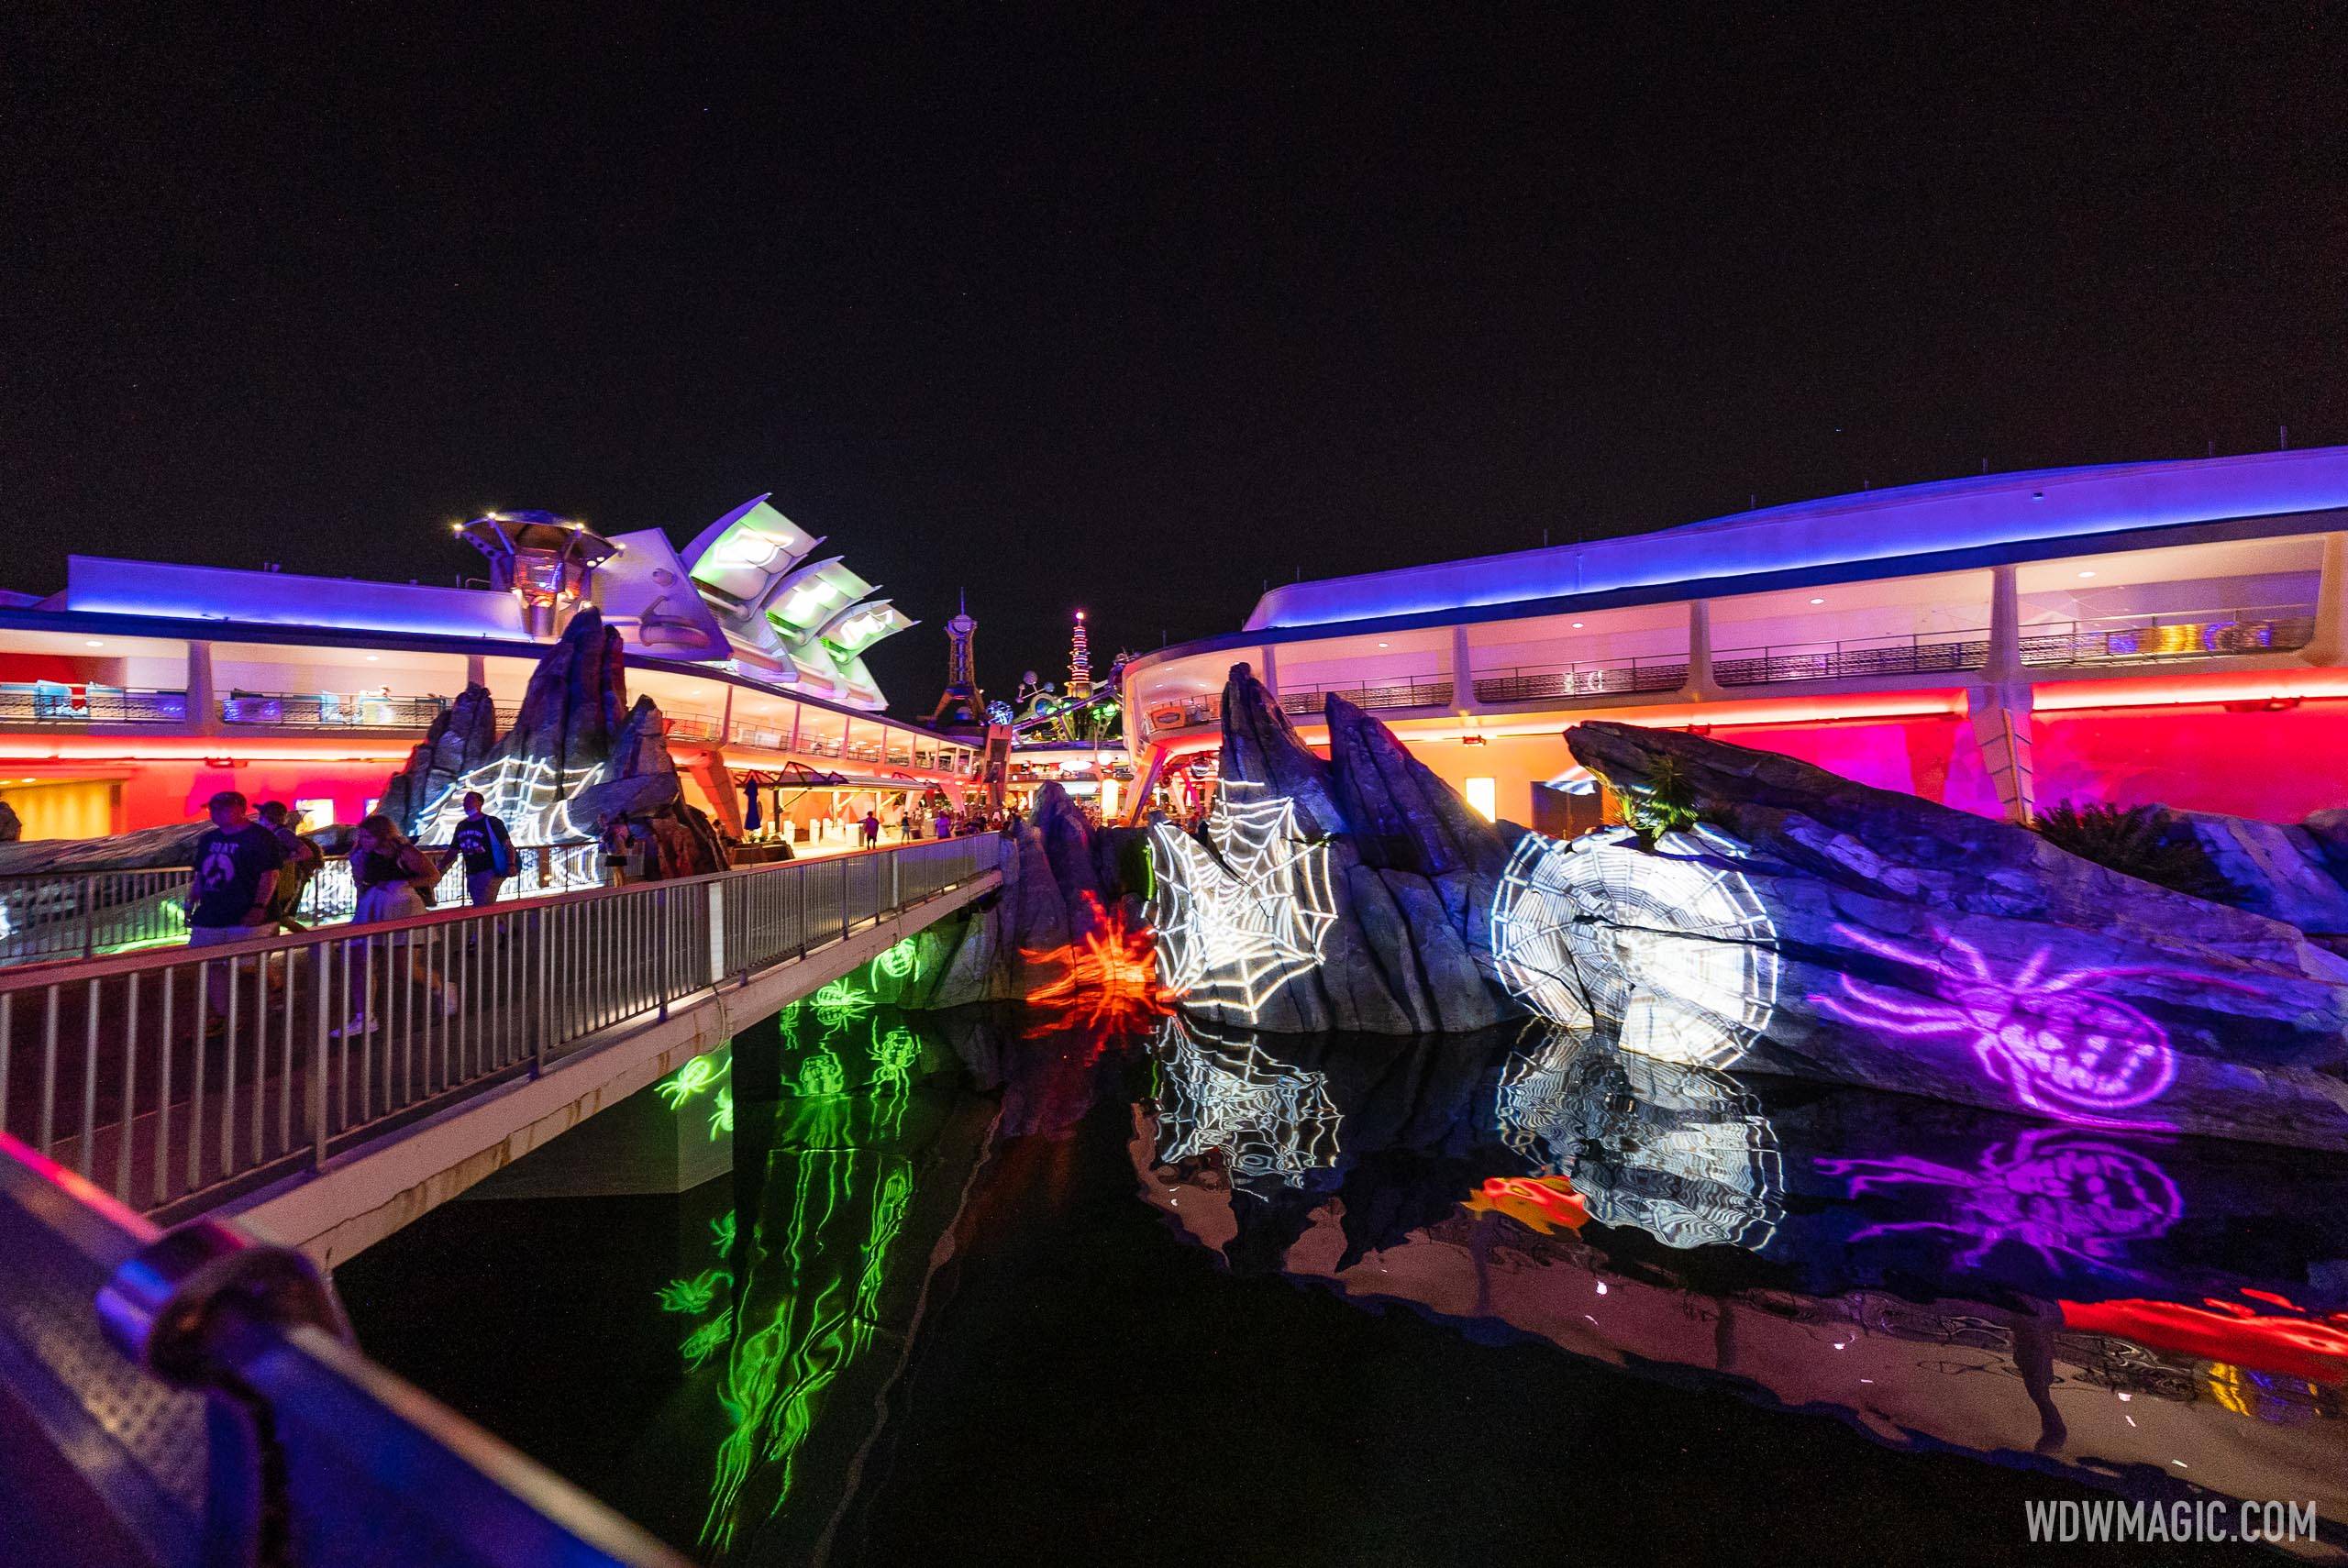 Halloween lighting effects at the entrance to Tomorrowland